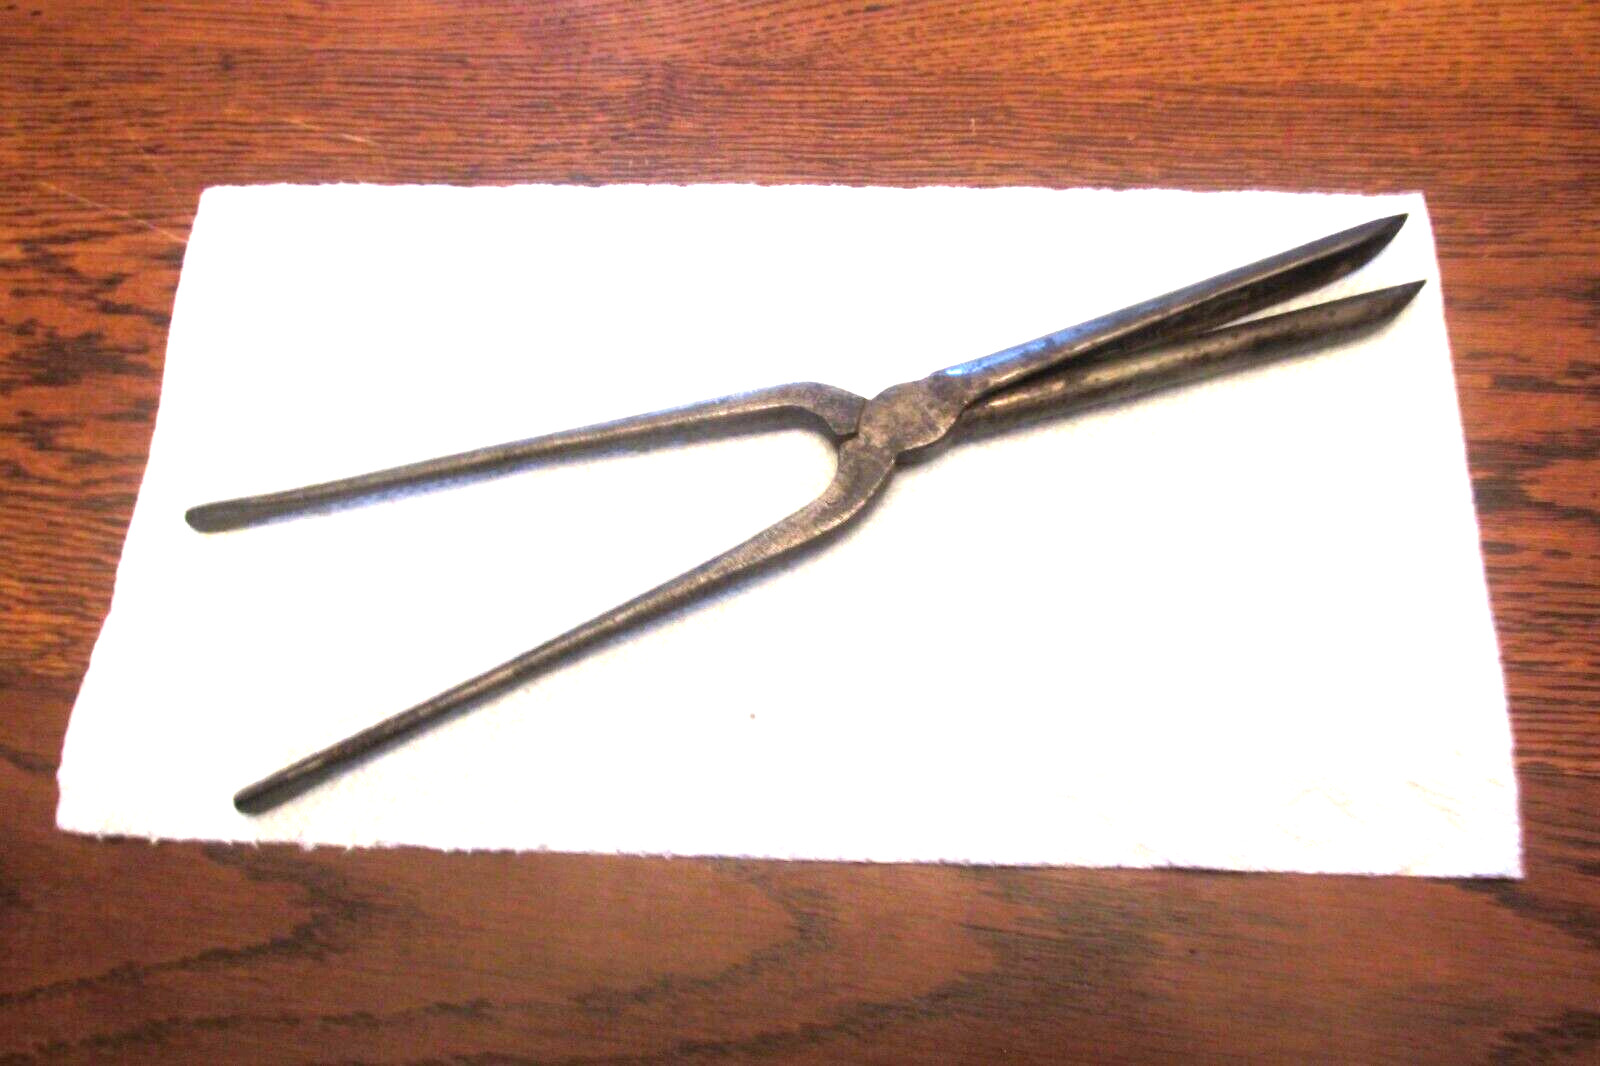 Original, 18th Or Early 19th C. Hair Or Wig Curling Iron #5. Maker's Mark